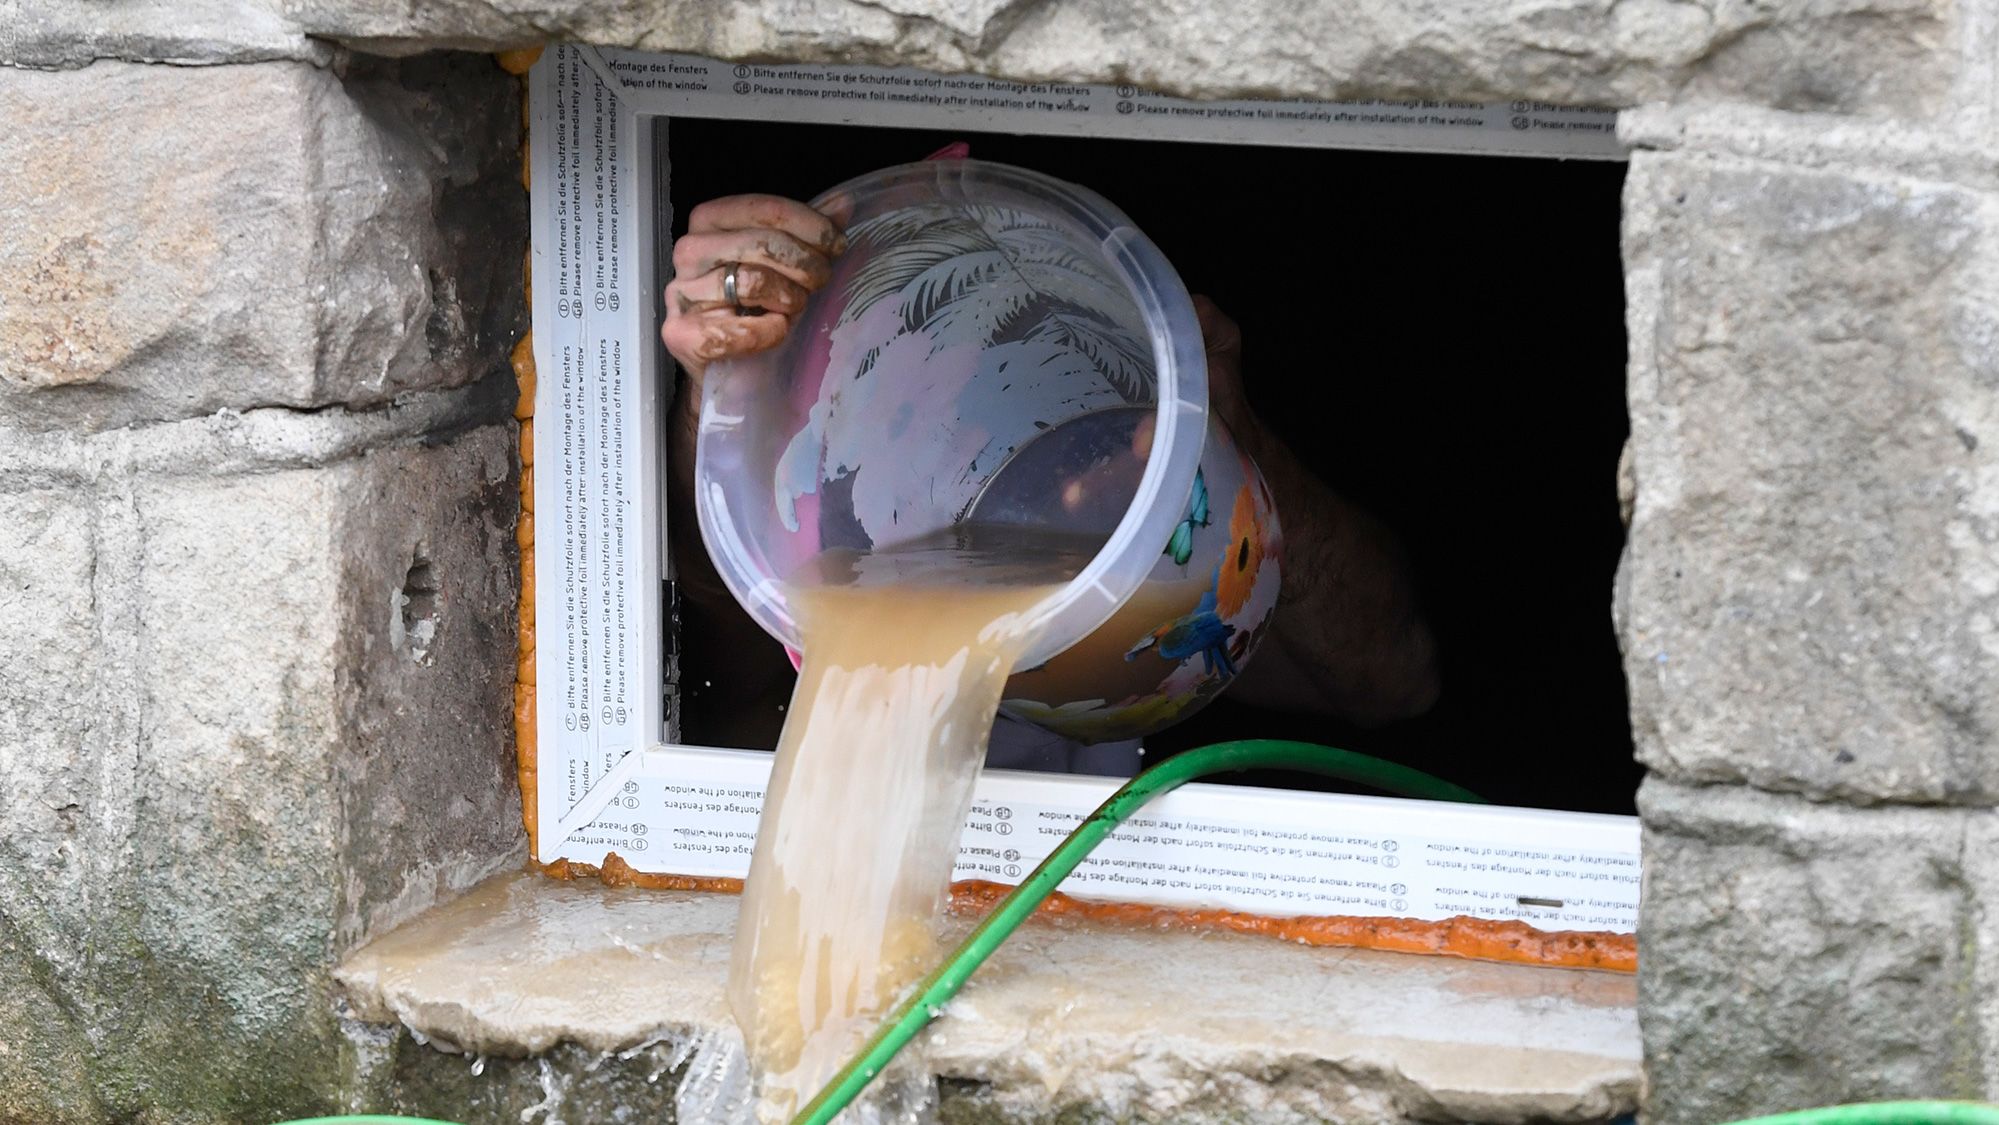 A resident uses a bucket to remove water from a house cellar in Hagen, Germany.